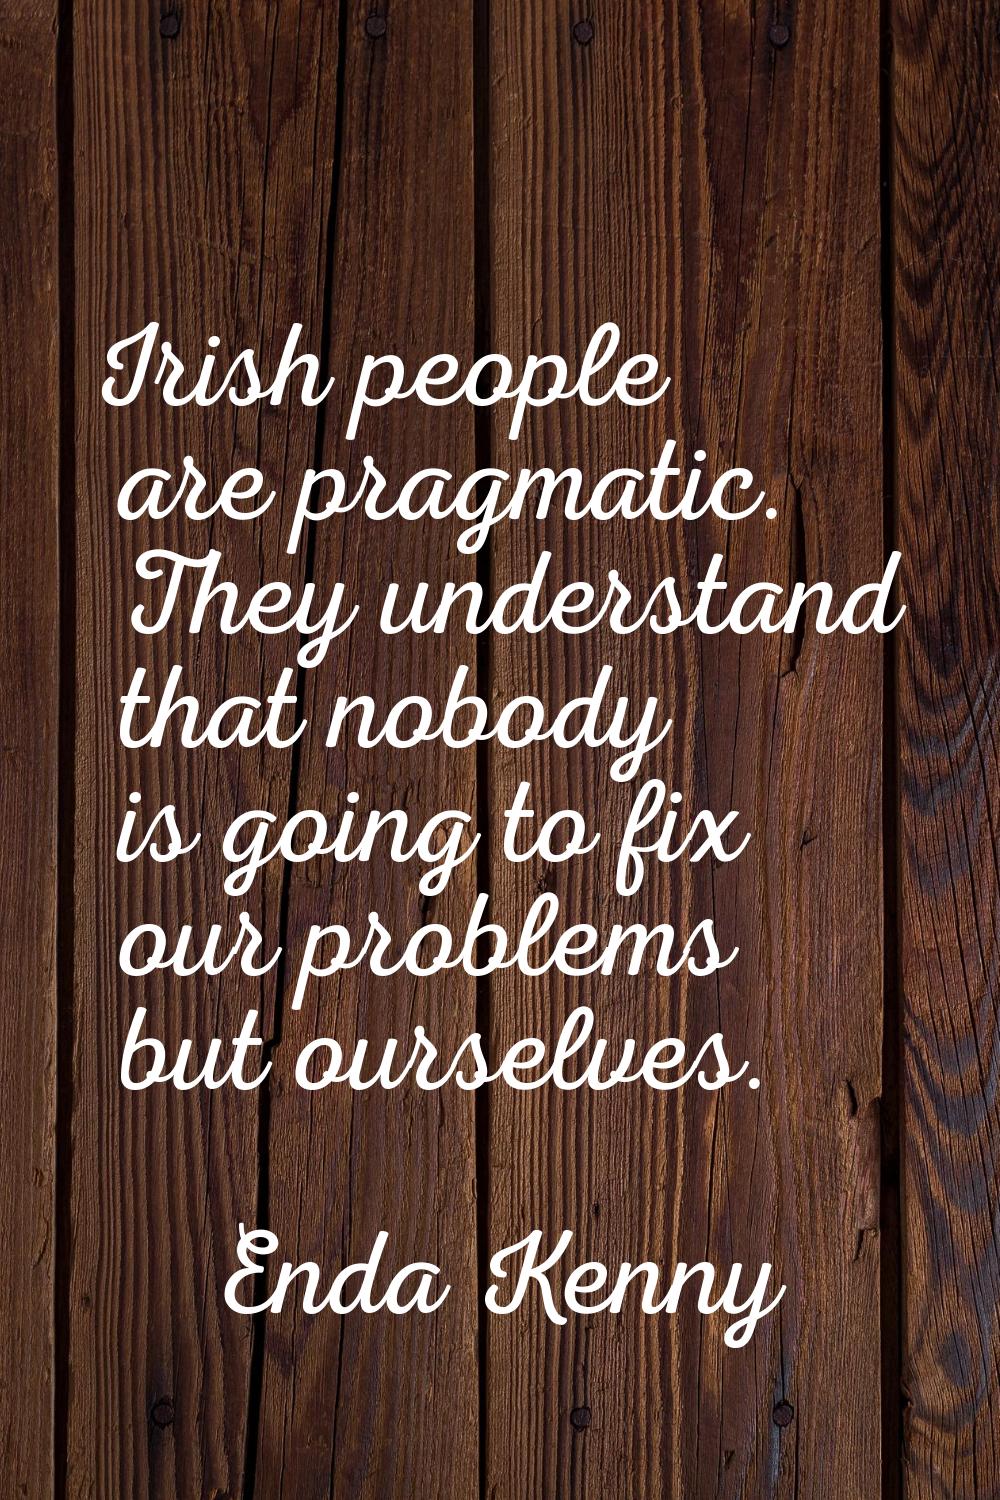 Irish people are pragmatic. They understand that nobody is going to fix our problems but ourselves.